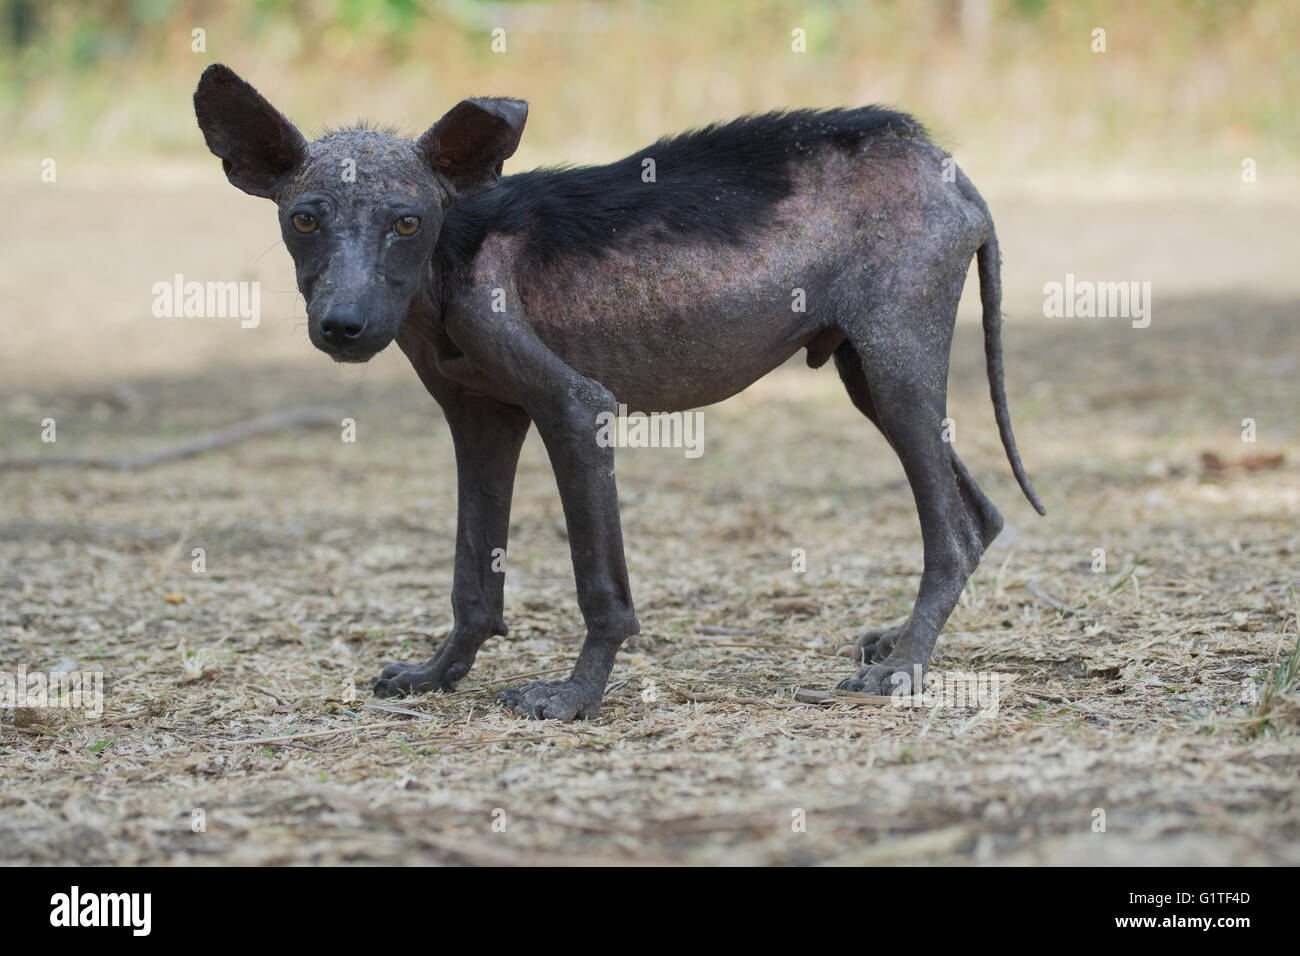 A street dog in the Philippines showing signs of skin disease. Stock Photo